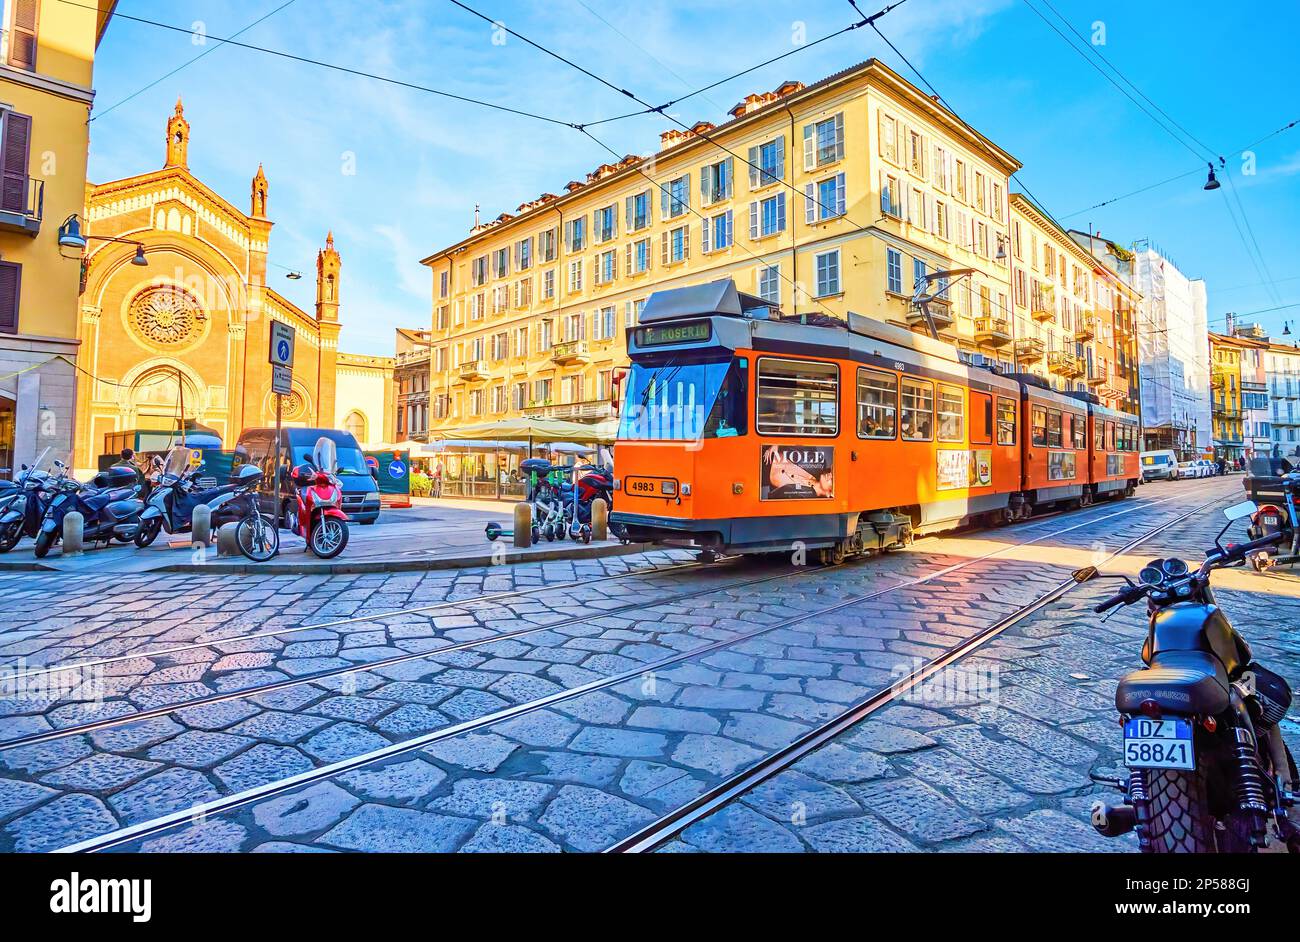 MILAN, ITALY - APRIL 11, 2022: Modern tram rides in Brera district, passing Piazza del Carmine, on April 11 in Milan, Italy Stock Photo